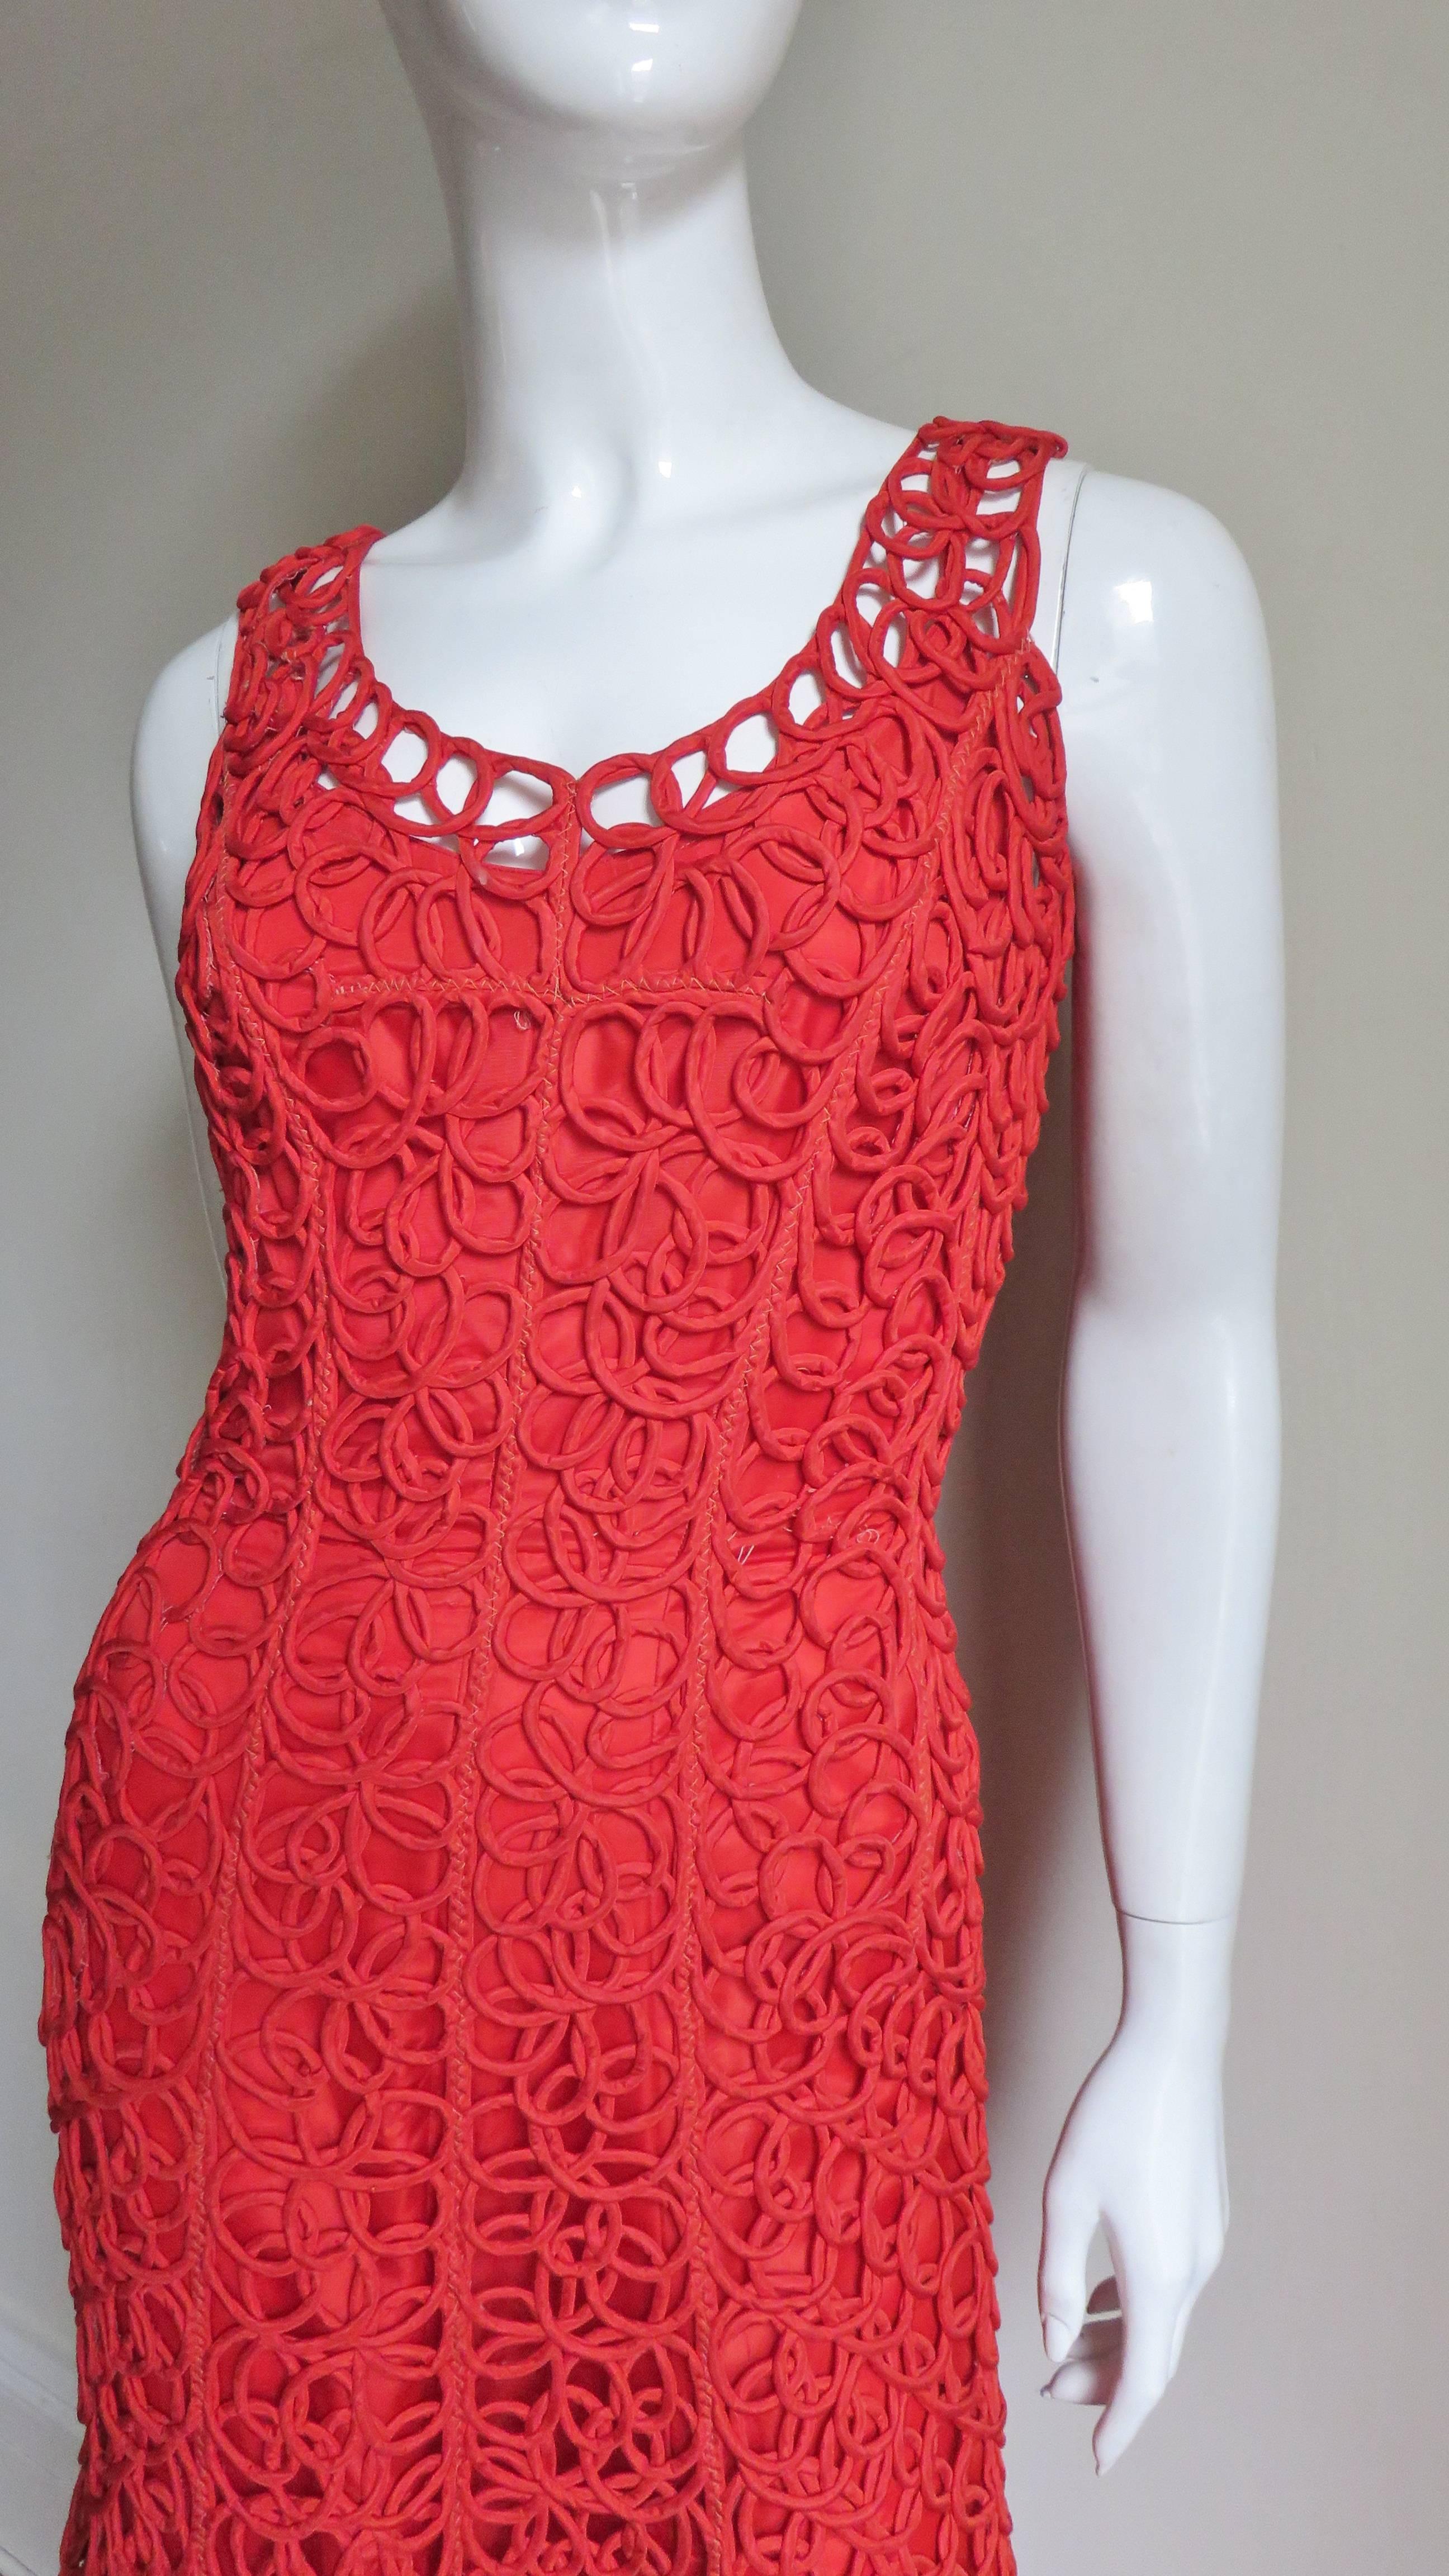 This is a fabulous, unique 1950s red dress comprised of yards and yards of piped fabric sewn in a circular coil pattern.  The dress is sleeveless with a scoop neck, semi fitted through to the hips then flaring towards the hemline.  It has a back red